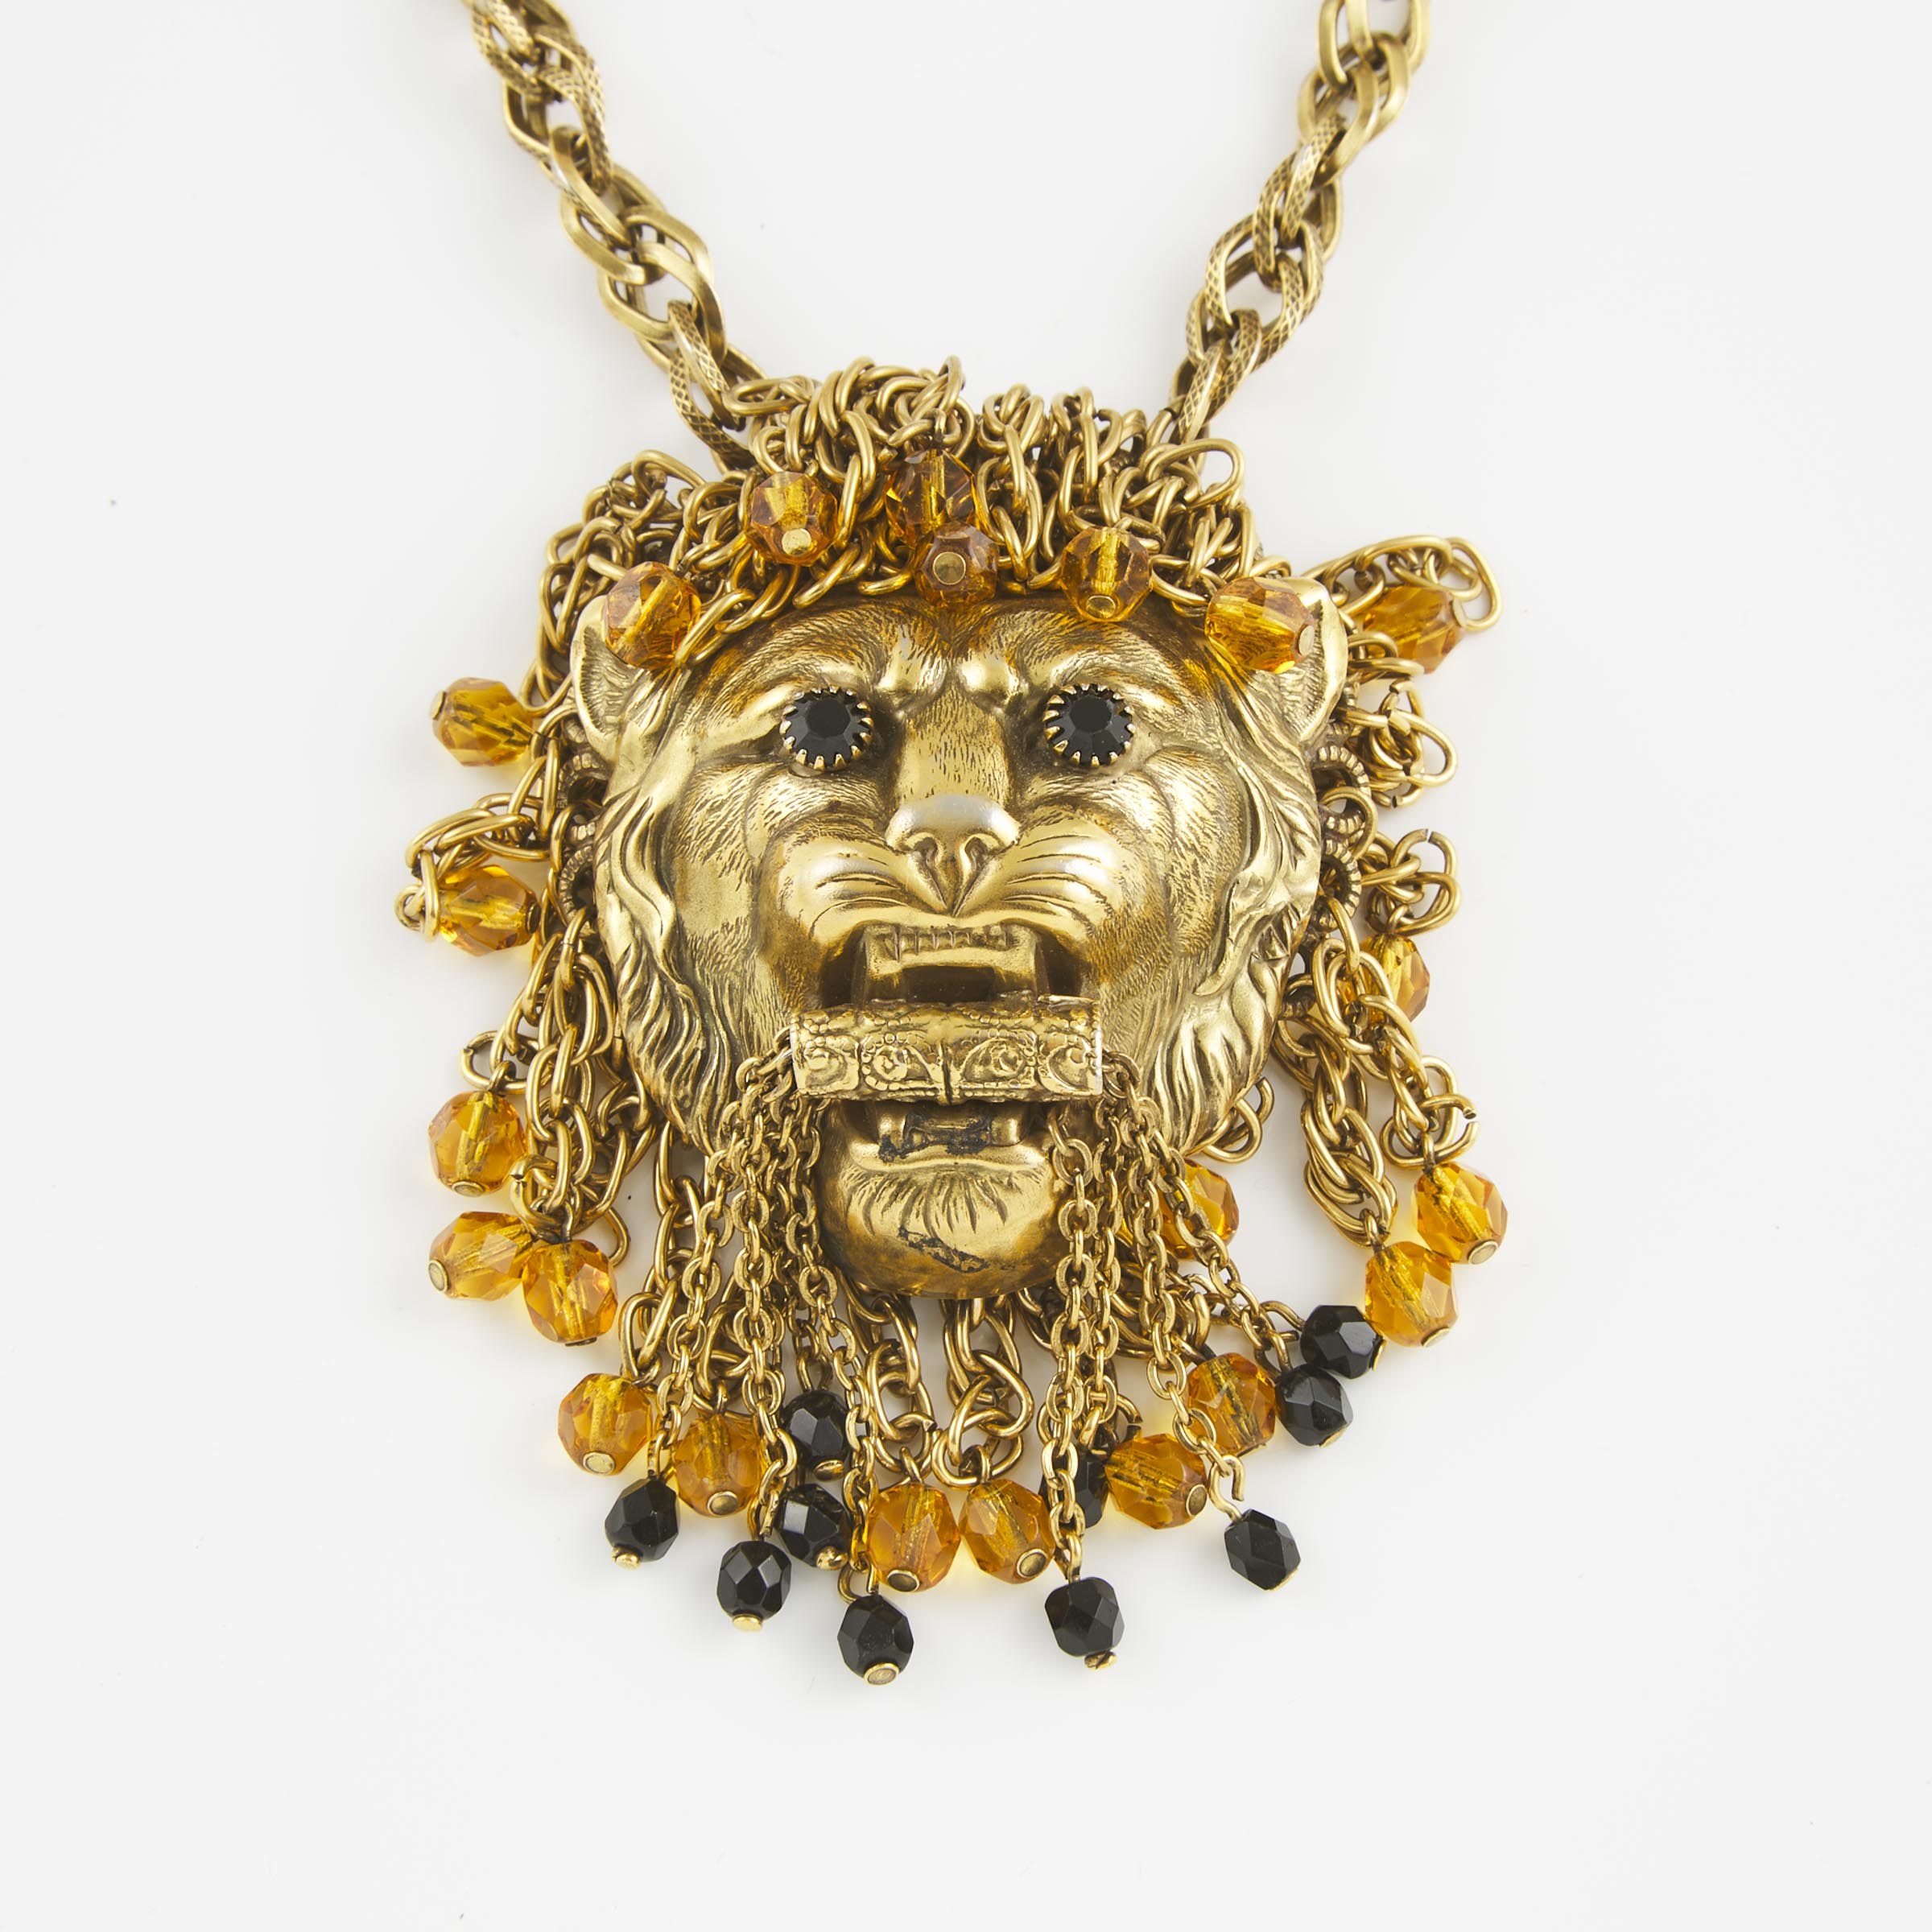 Gold-Tone Metal Lion Pendant And Chain